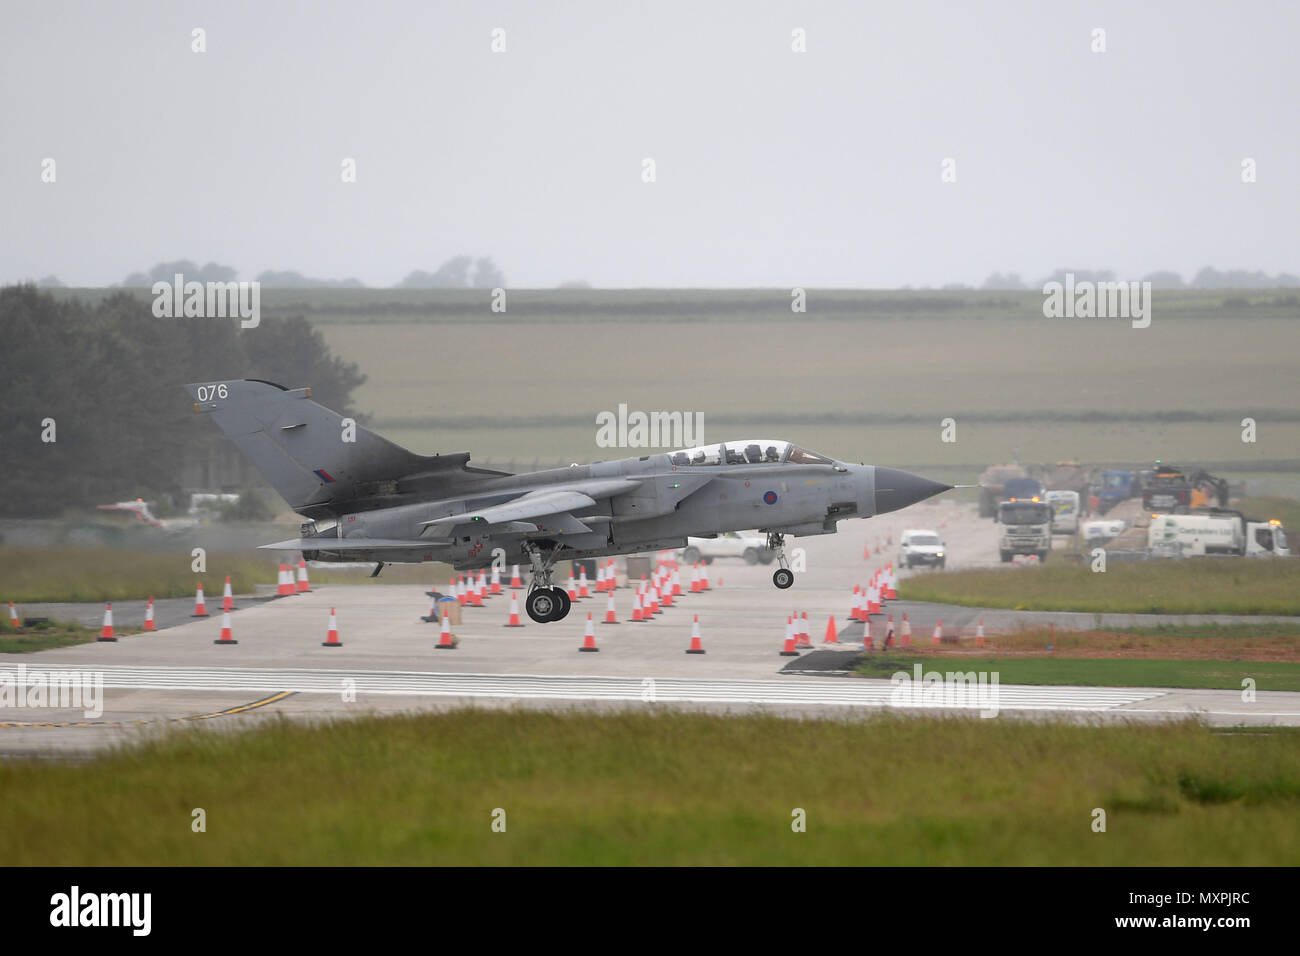 A Tornado GR4 comes in to land at RAF Marham, as construction work continues at the base in Norfolk, ahead of the arrival of the new F-35B Lightning stealth fighter jets later this week. Stock Photo